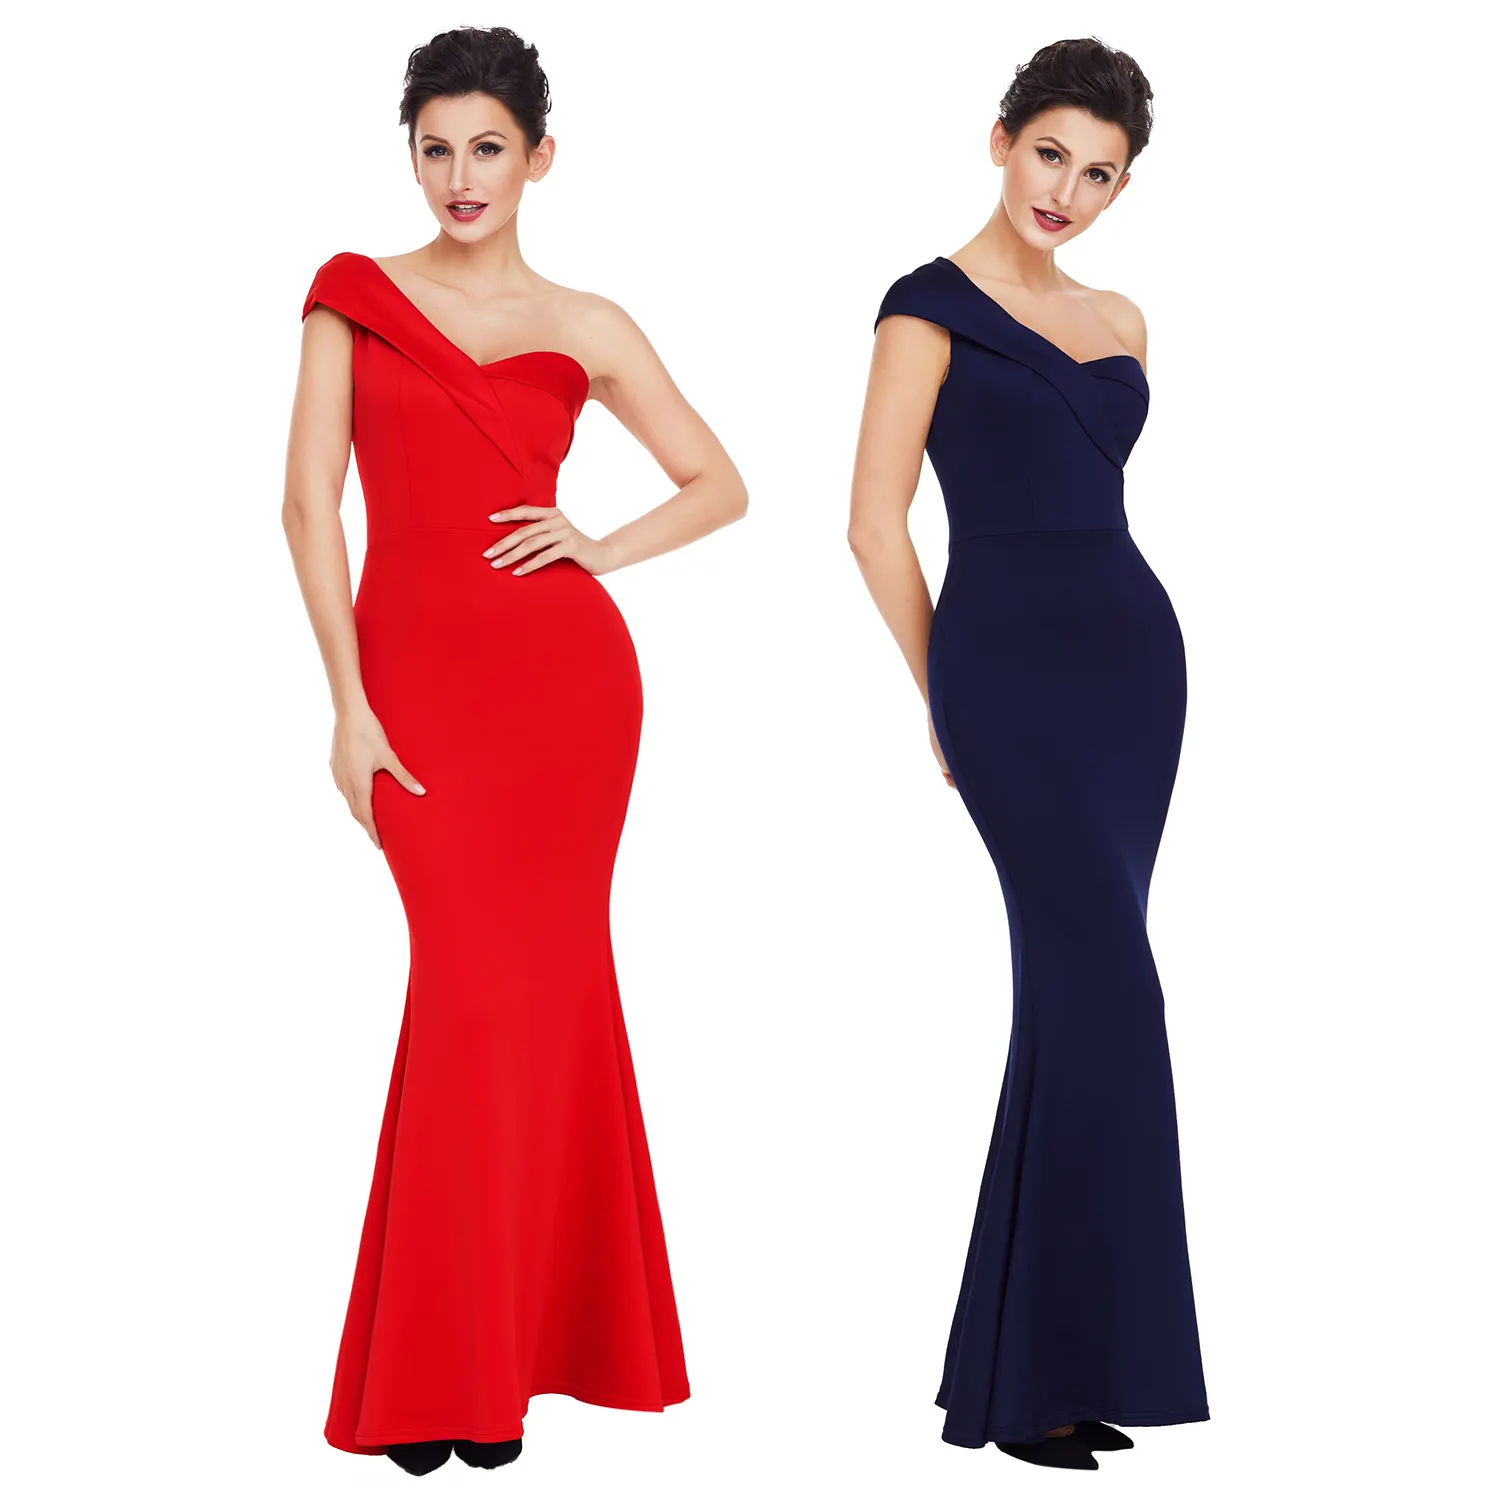 Elegance Ball Gown Wholesale Sexy One Shoulder Evening Dress Party Gowns for Women